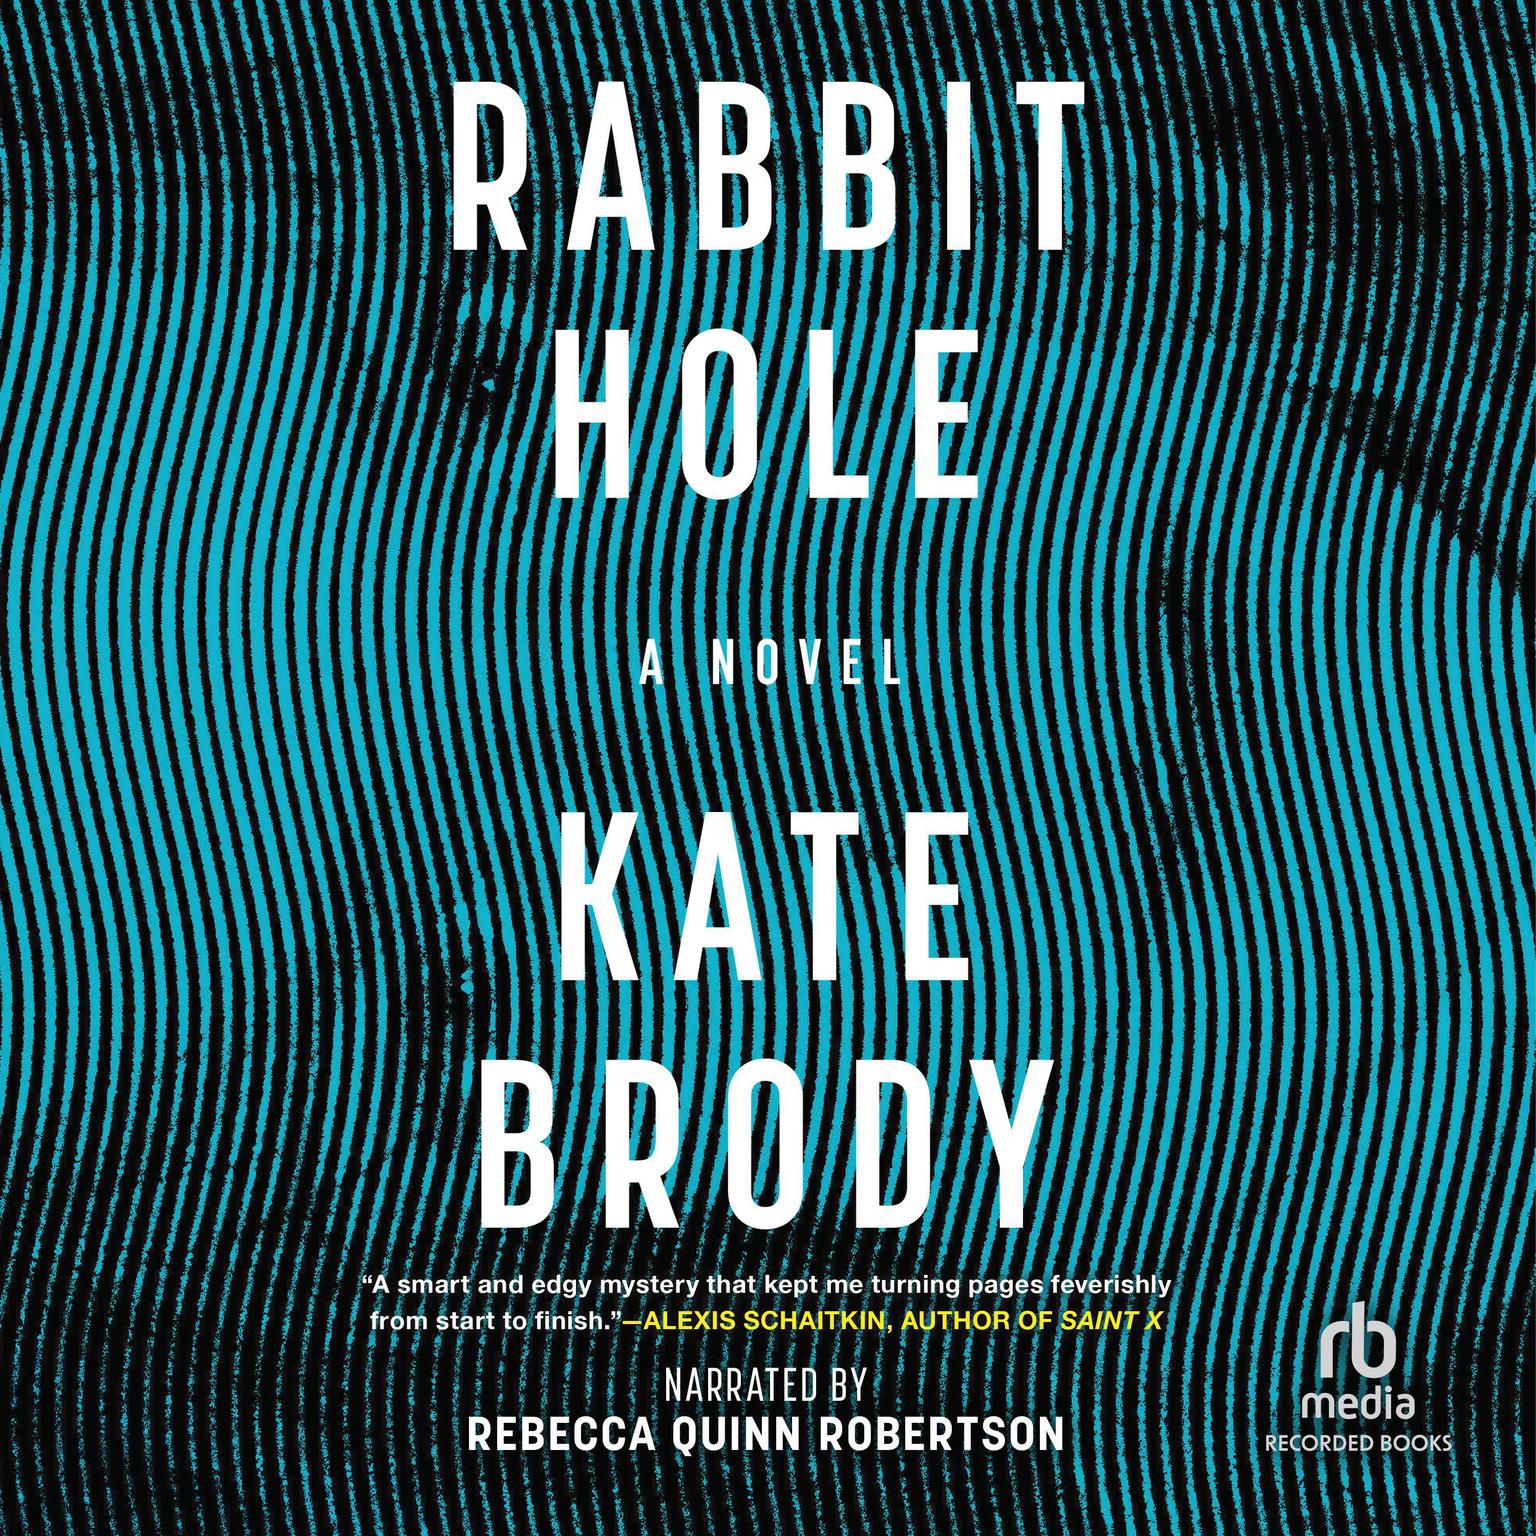 Rabbit Hole Audiobook, by Kate Brody